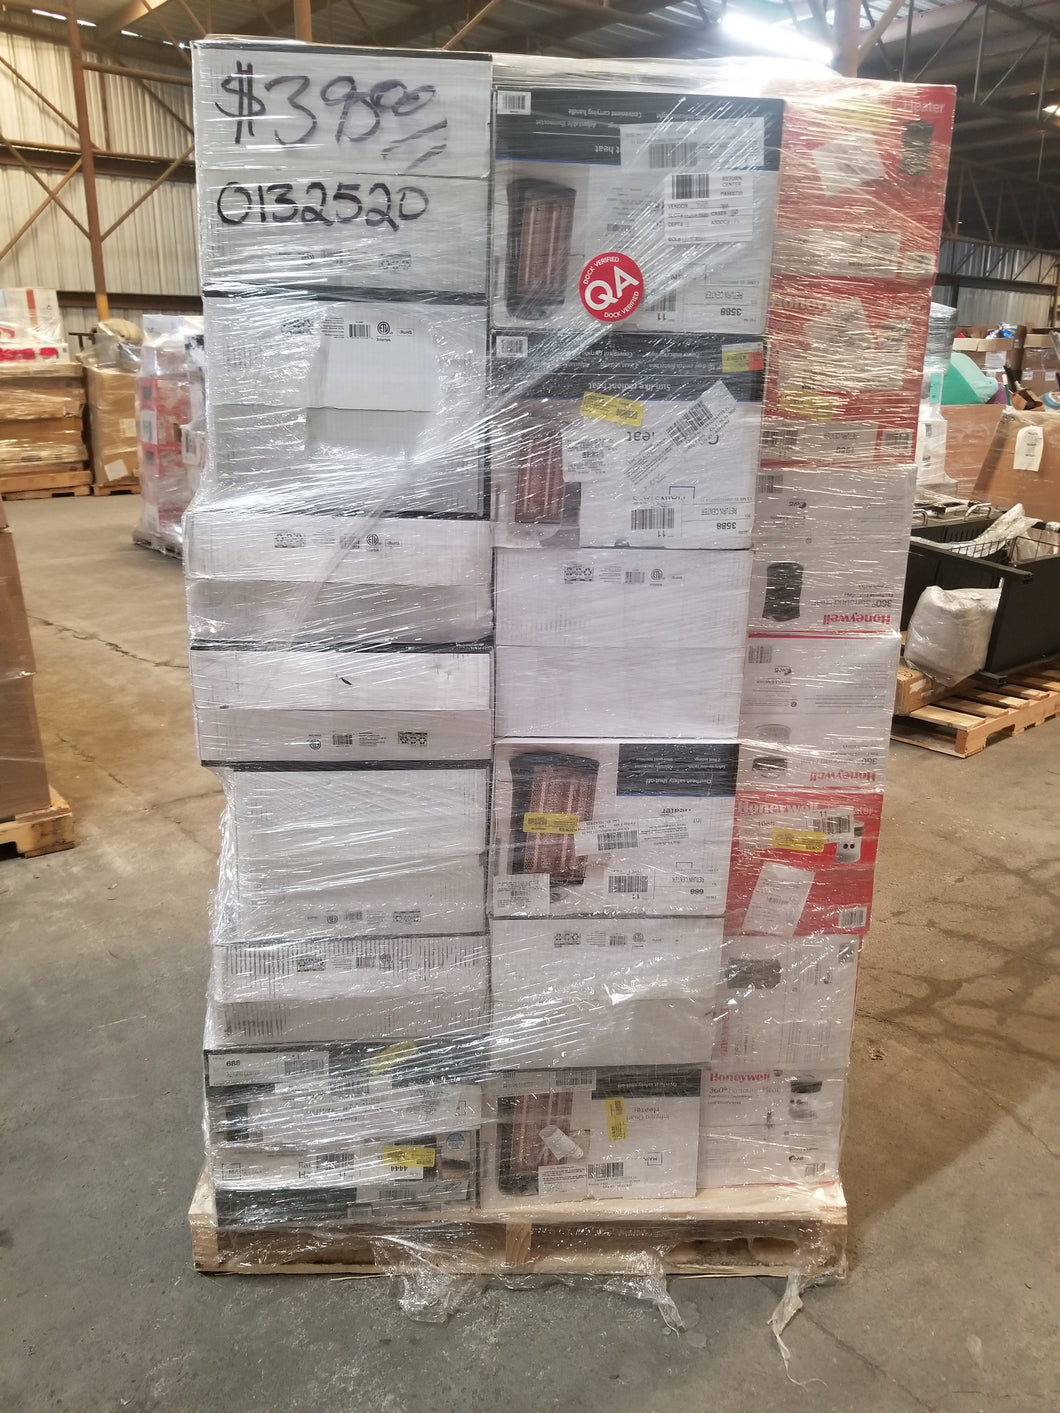 Wal-Mart Electric Heaters Pallet - 0132520